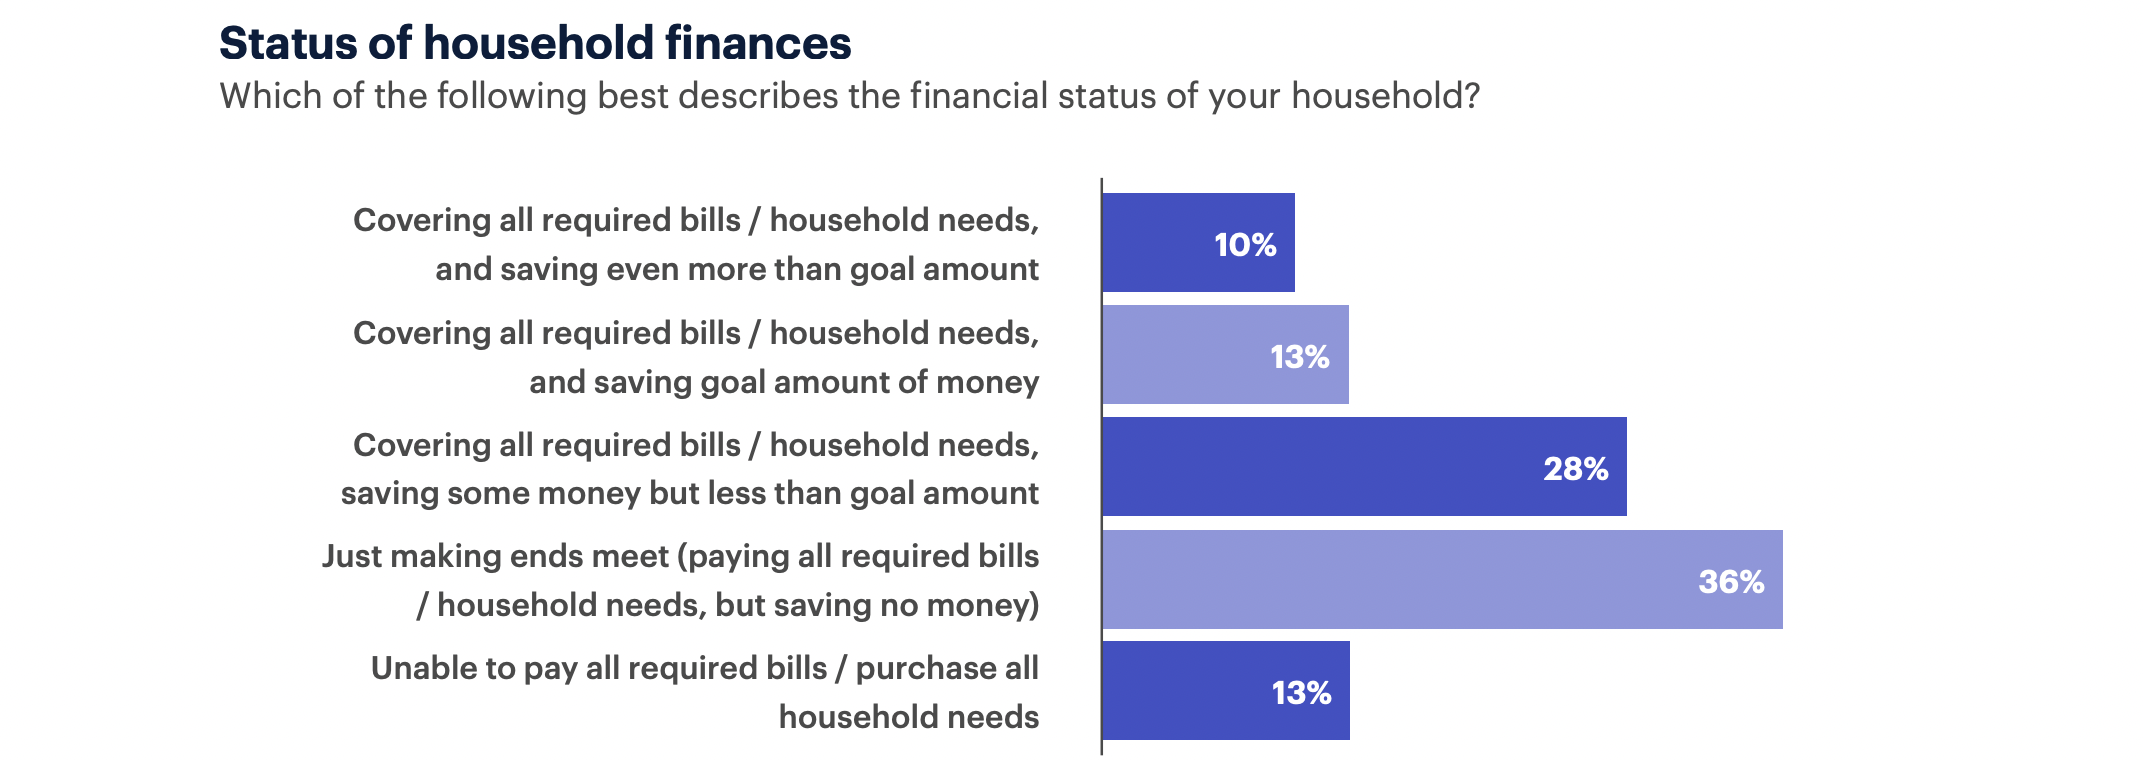 Status of household finances; 36% claim they are just making ends meet